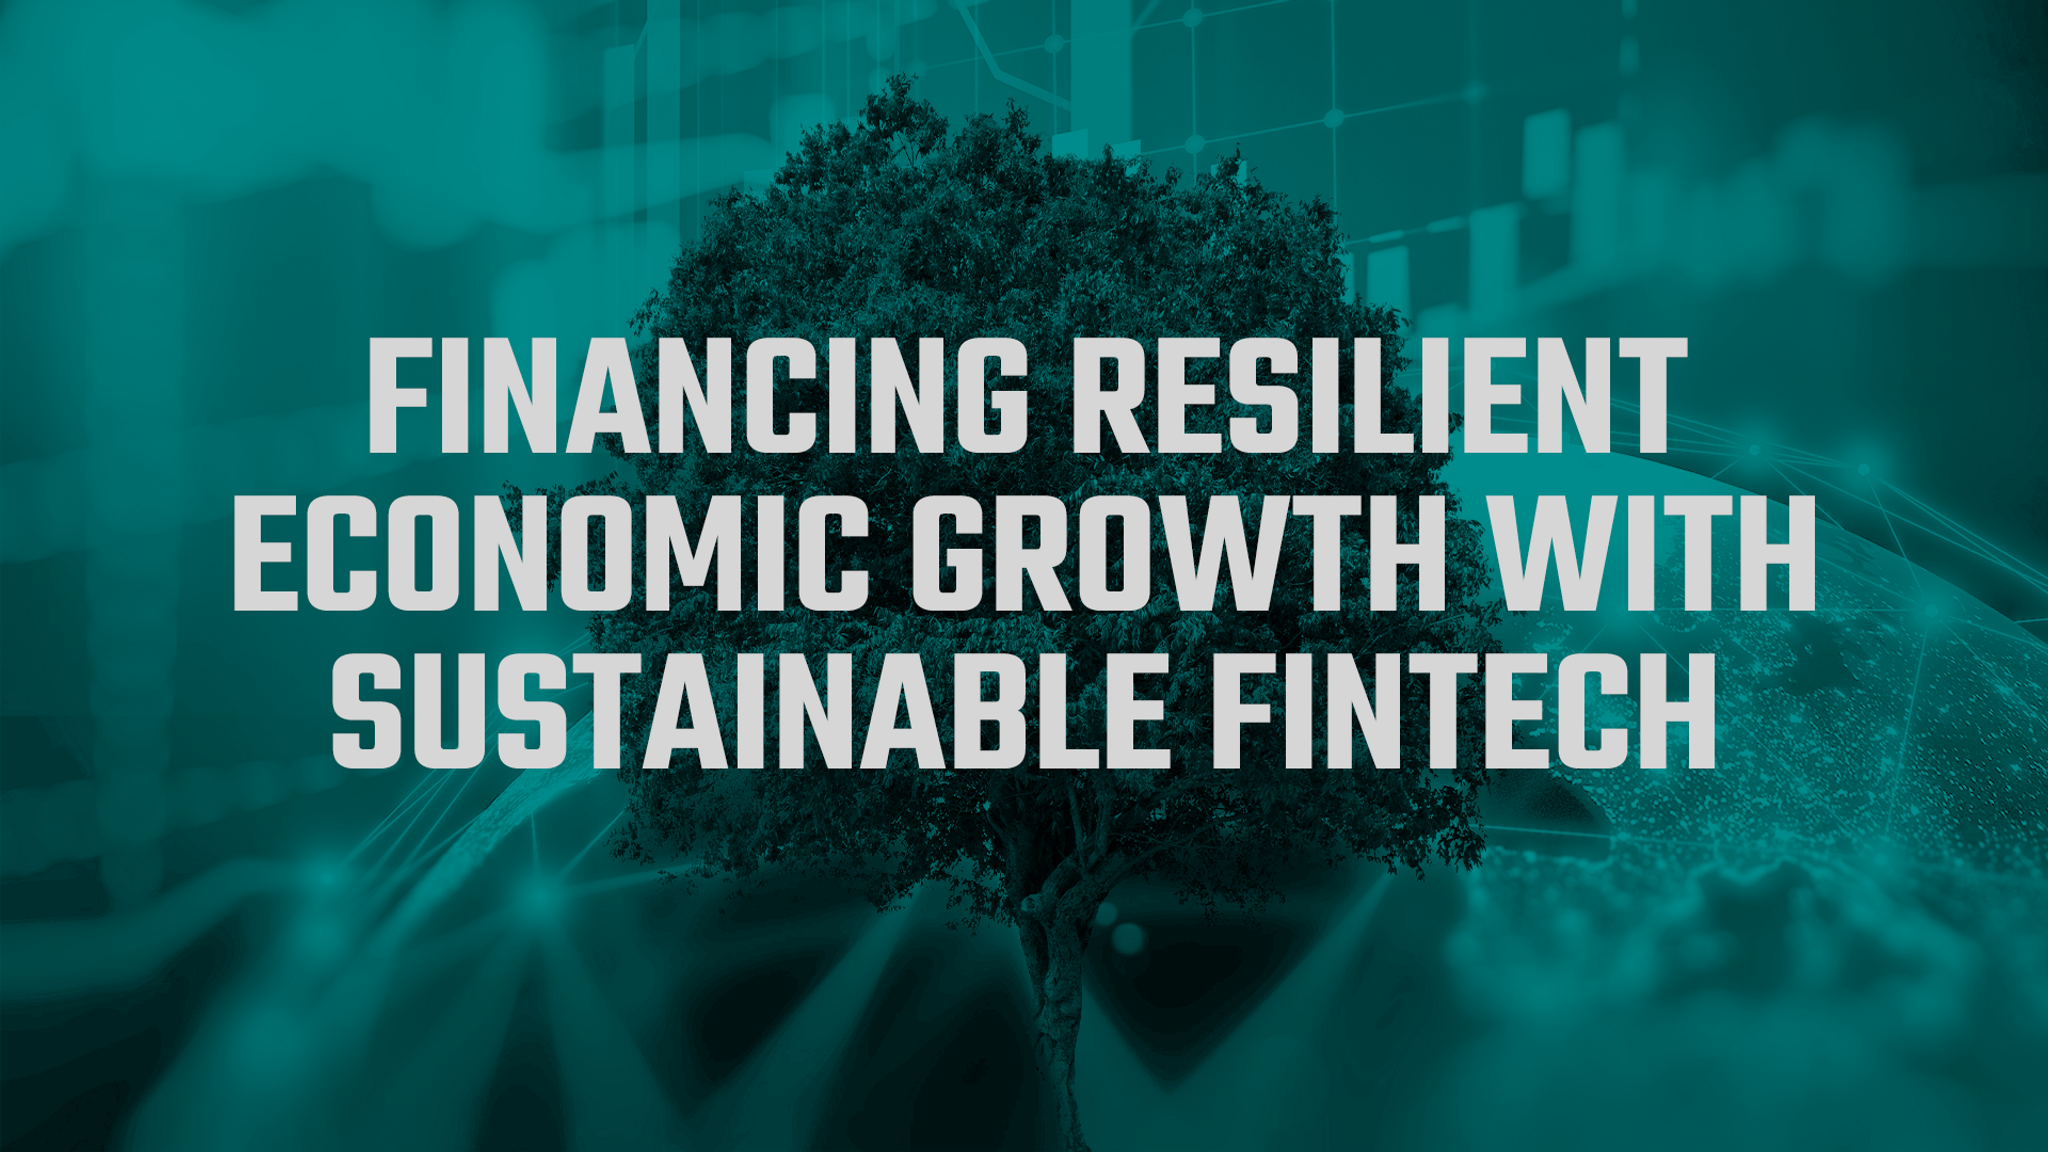 Financing resilient economic growth with sustainable fintech